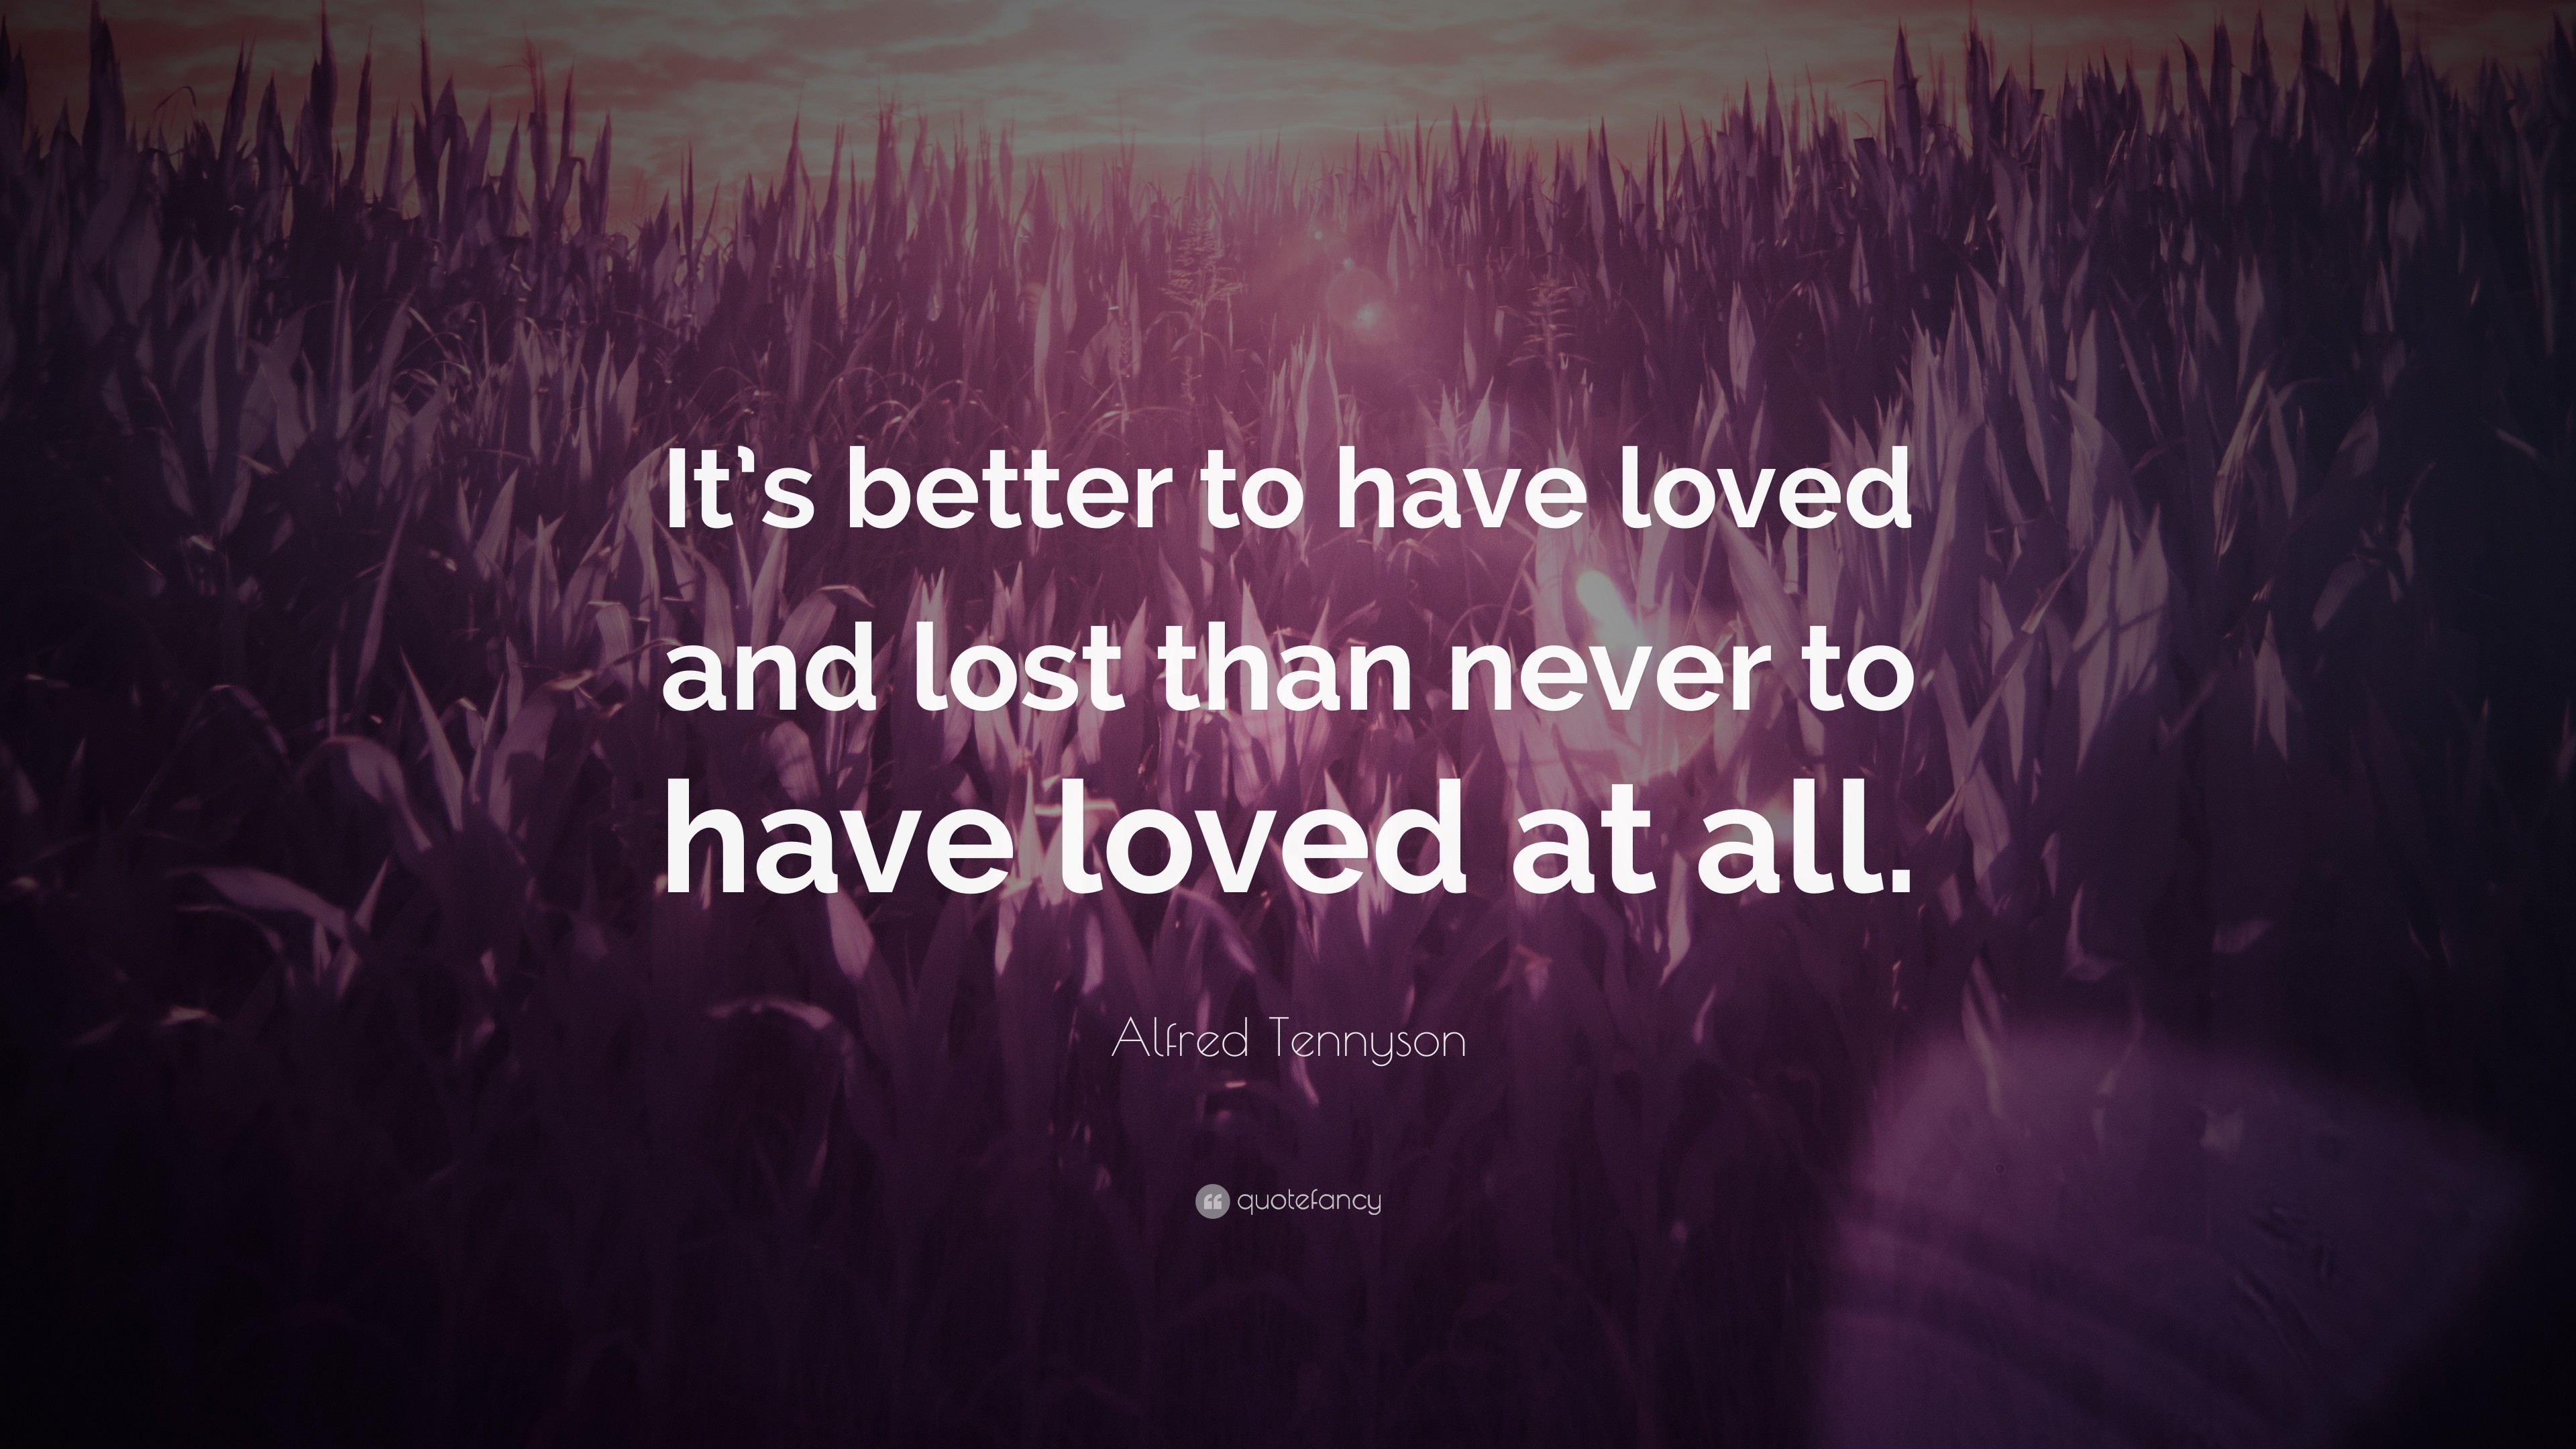 3840x2160 Love Quotes: “It's better to have loved and lost than never to have loved